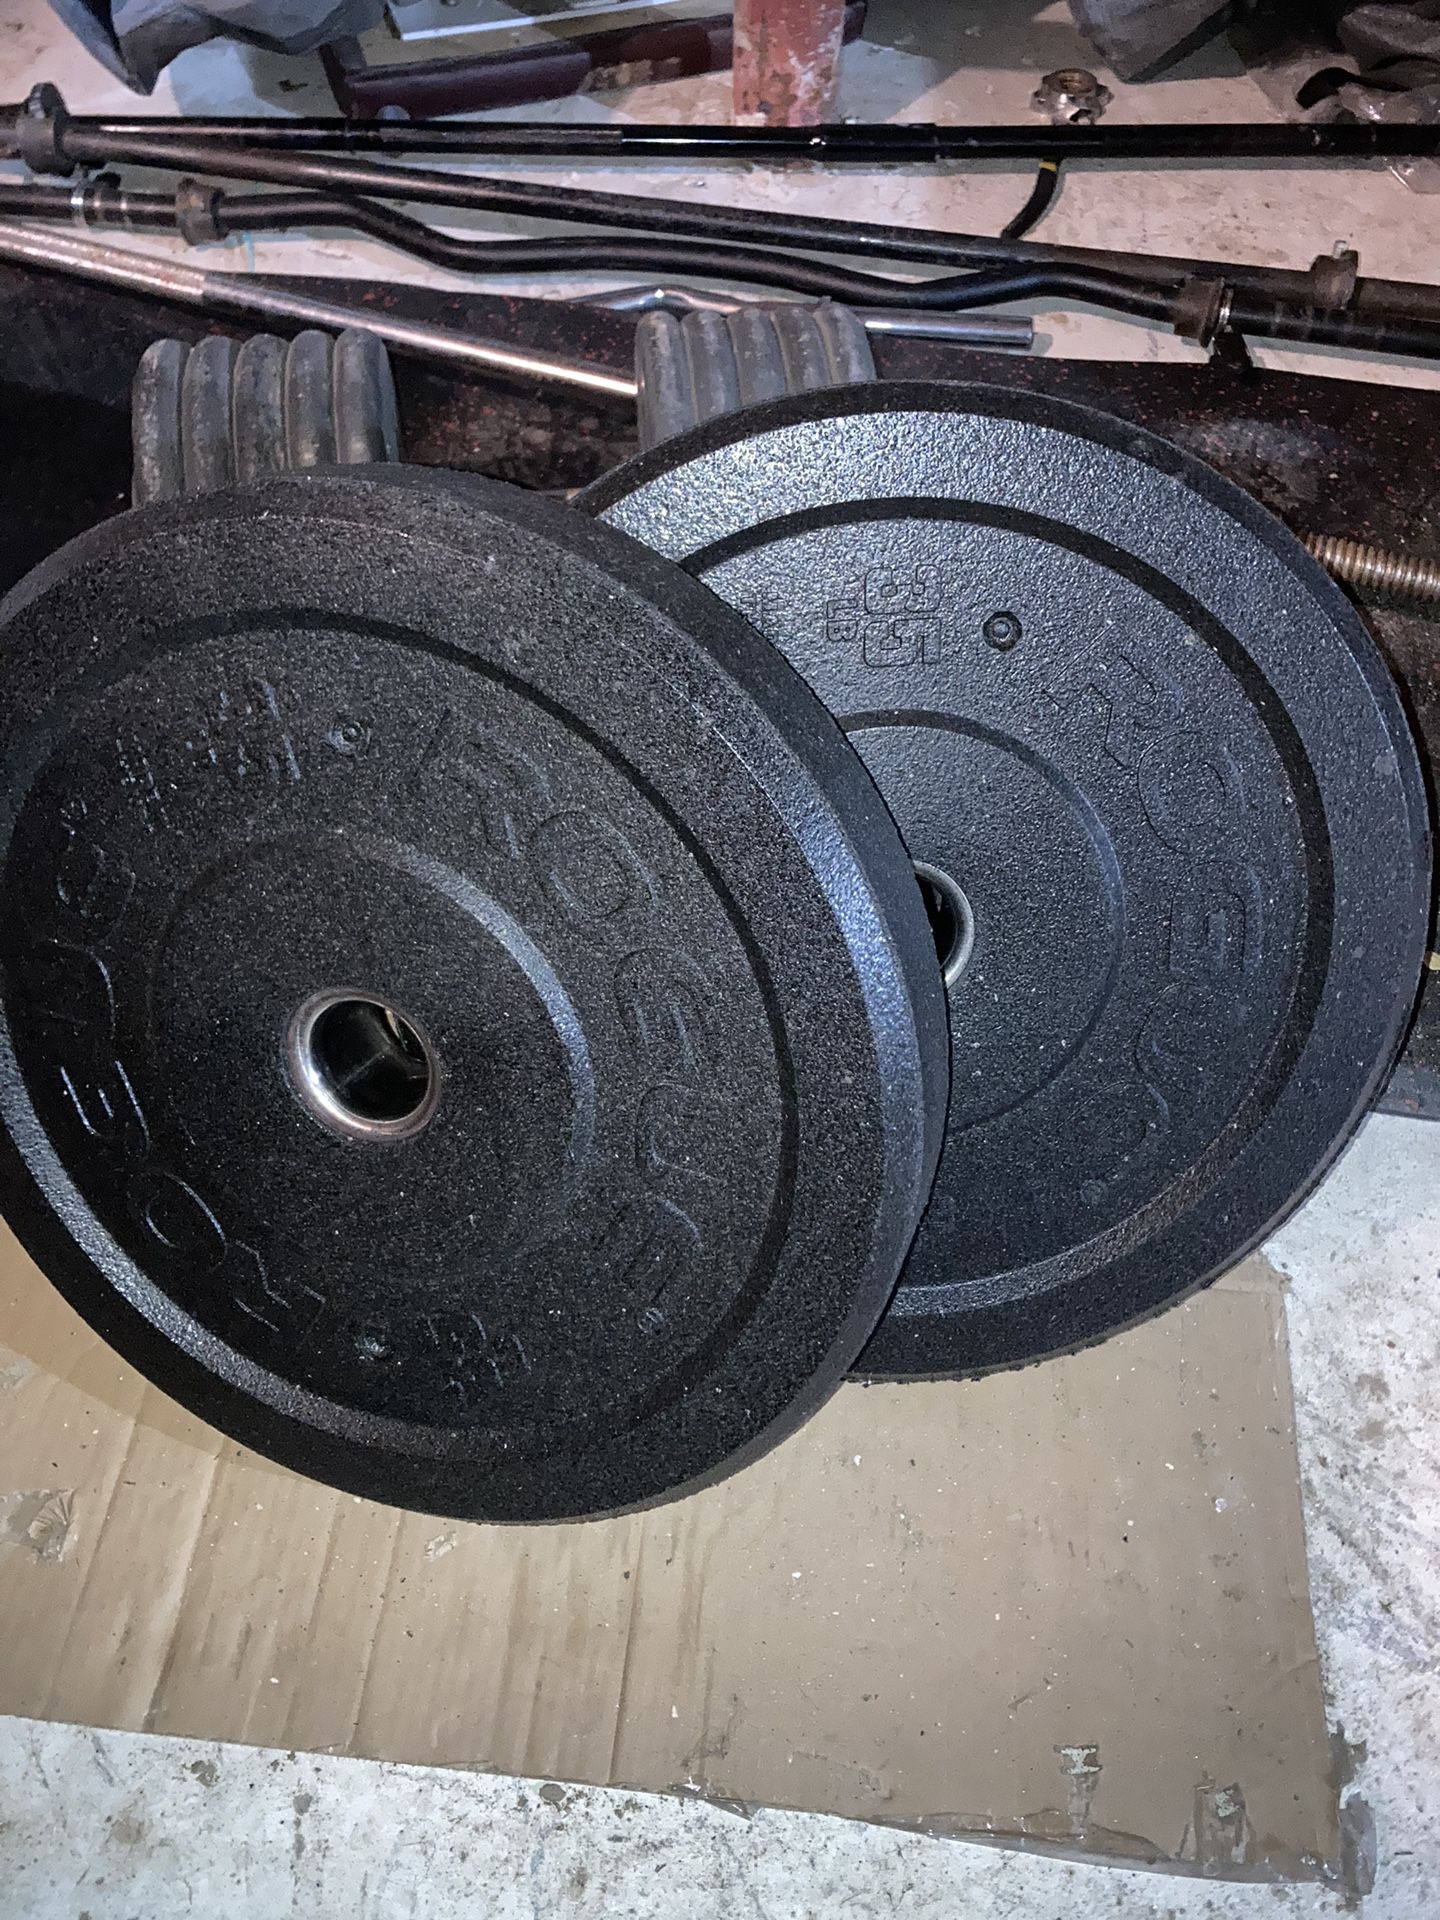 Rogue Bumper Plates with Barbell and Curlbar